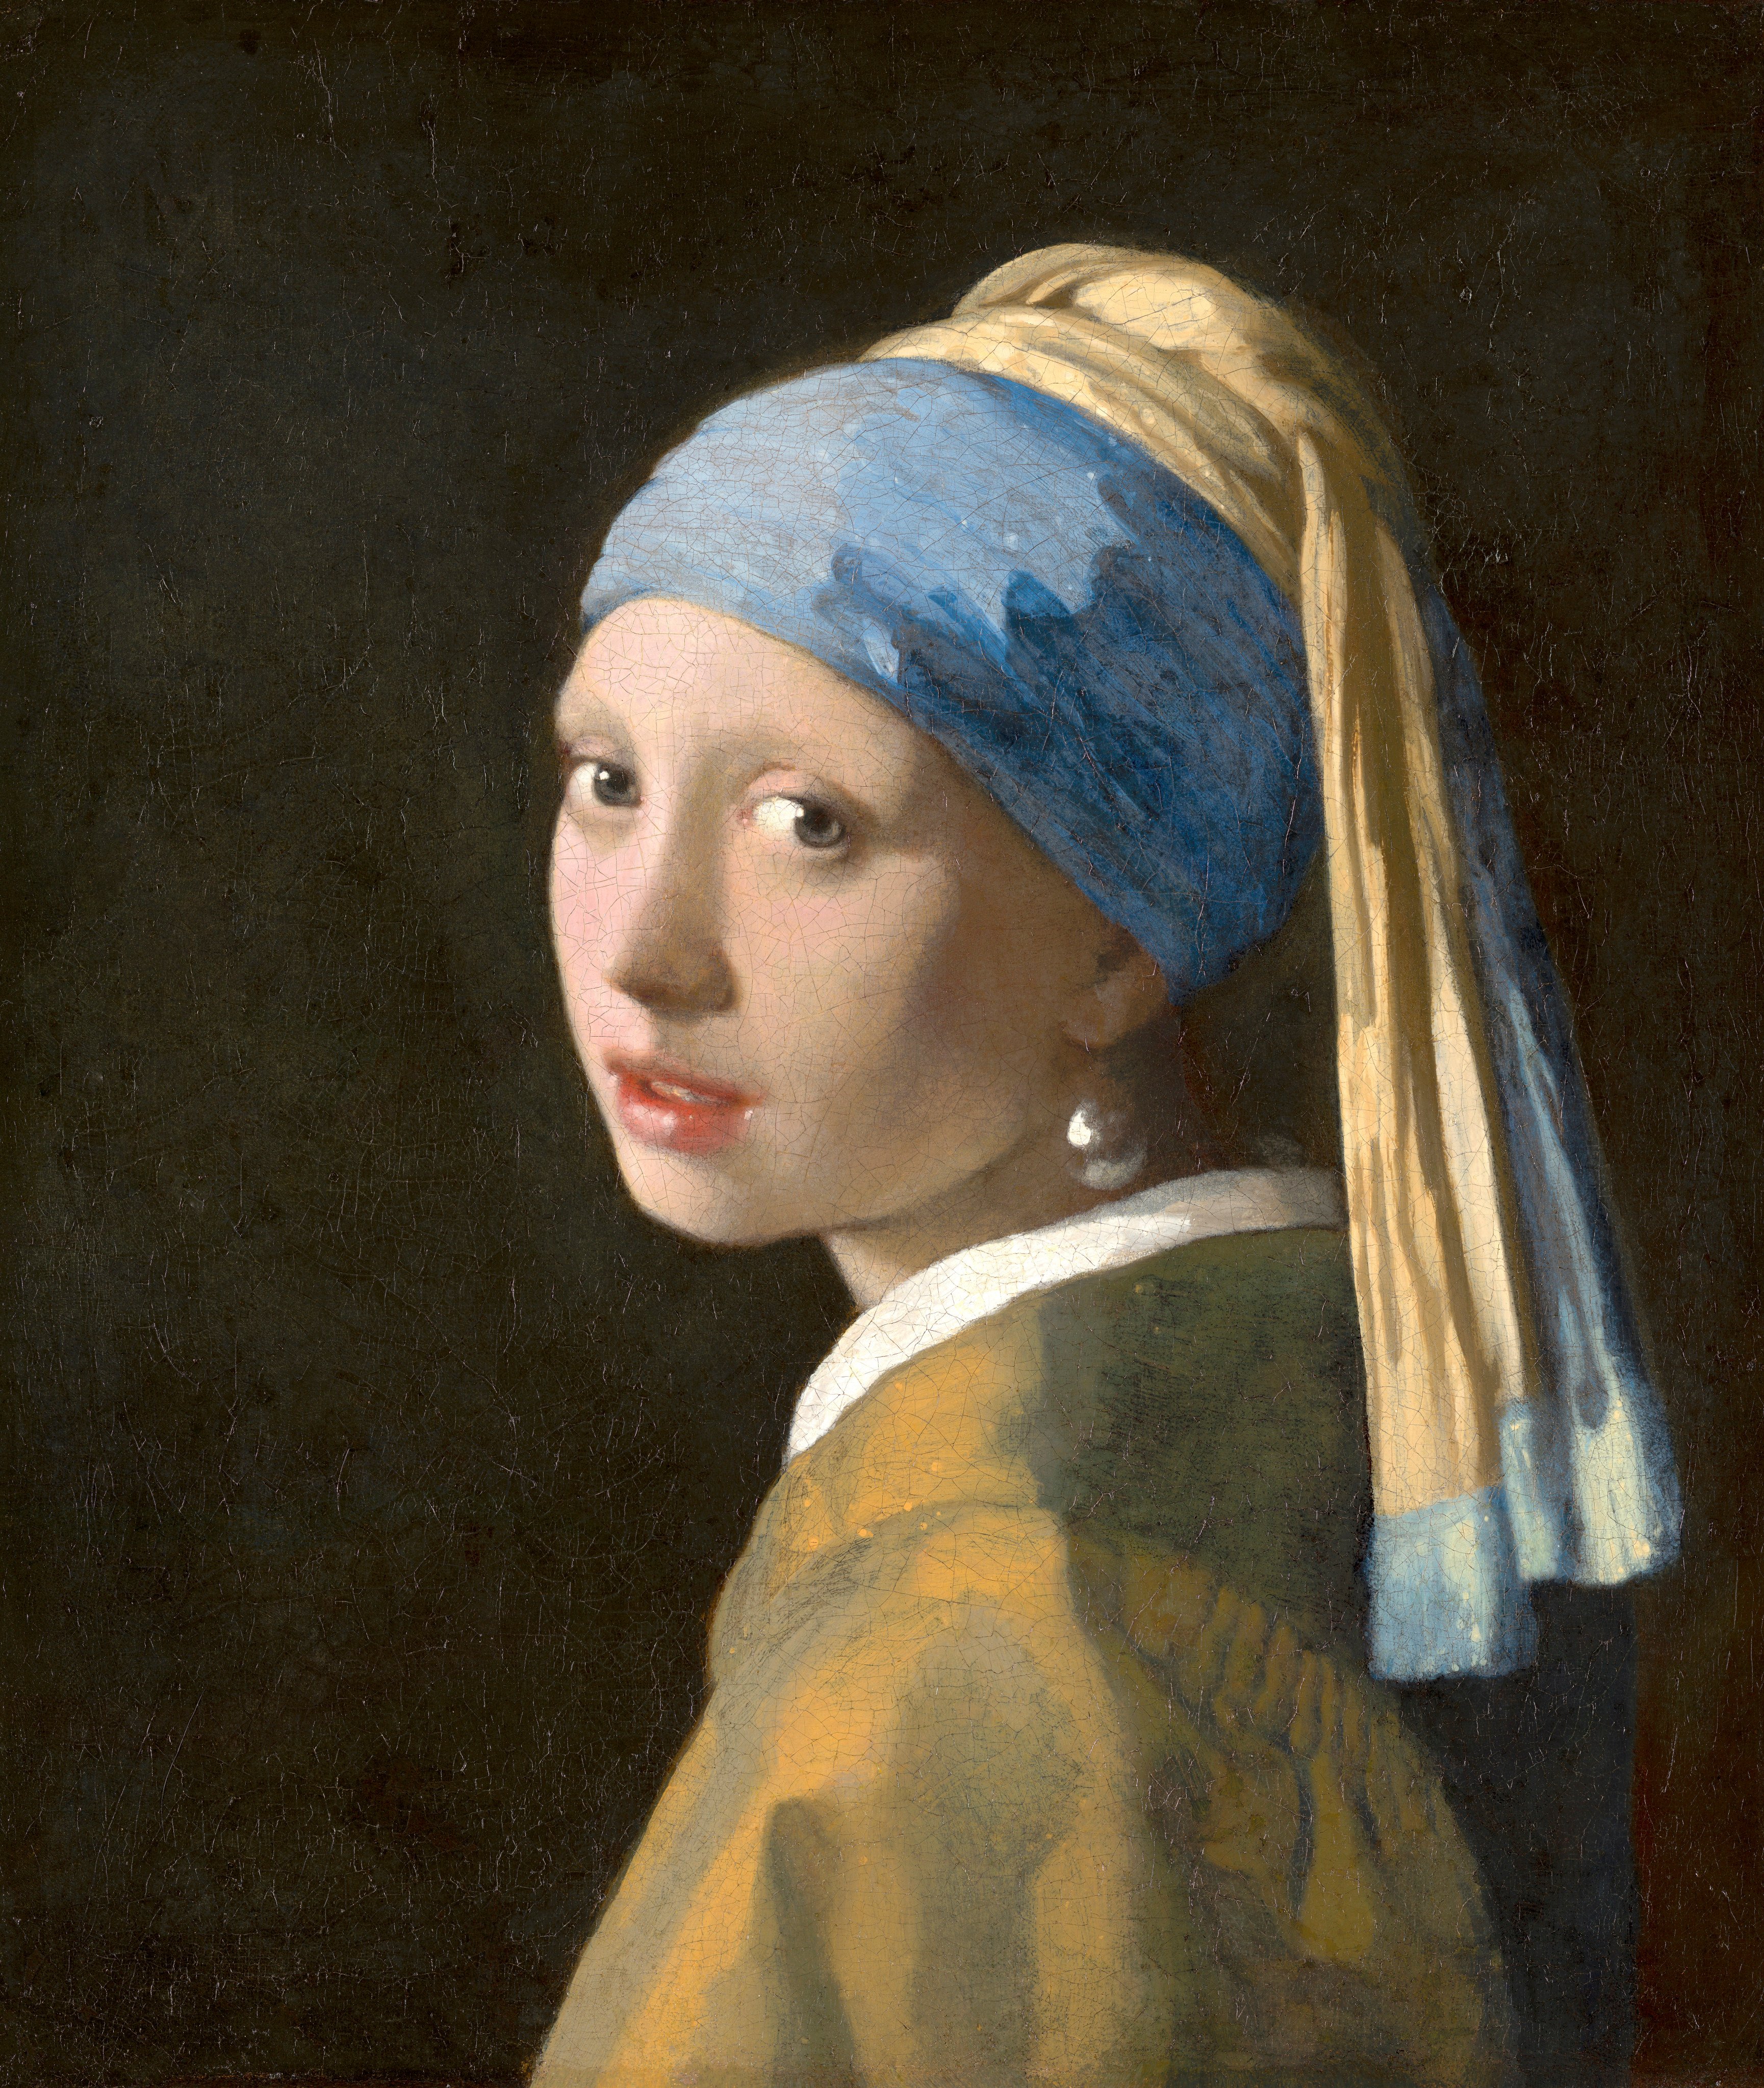 “Girl with a Pearl Earring” (1665) by Johannes Vermeer. An exhibition at Amsterdam’s Rijksmuseum features this famous painting and 27 others, in the show of Vermeers ever assembled. Photo: Rijksmuseum/Johannes Vermeer